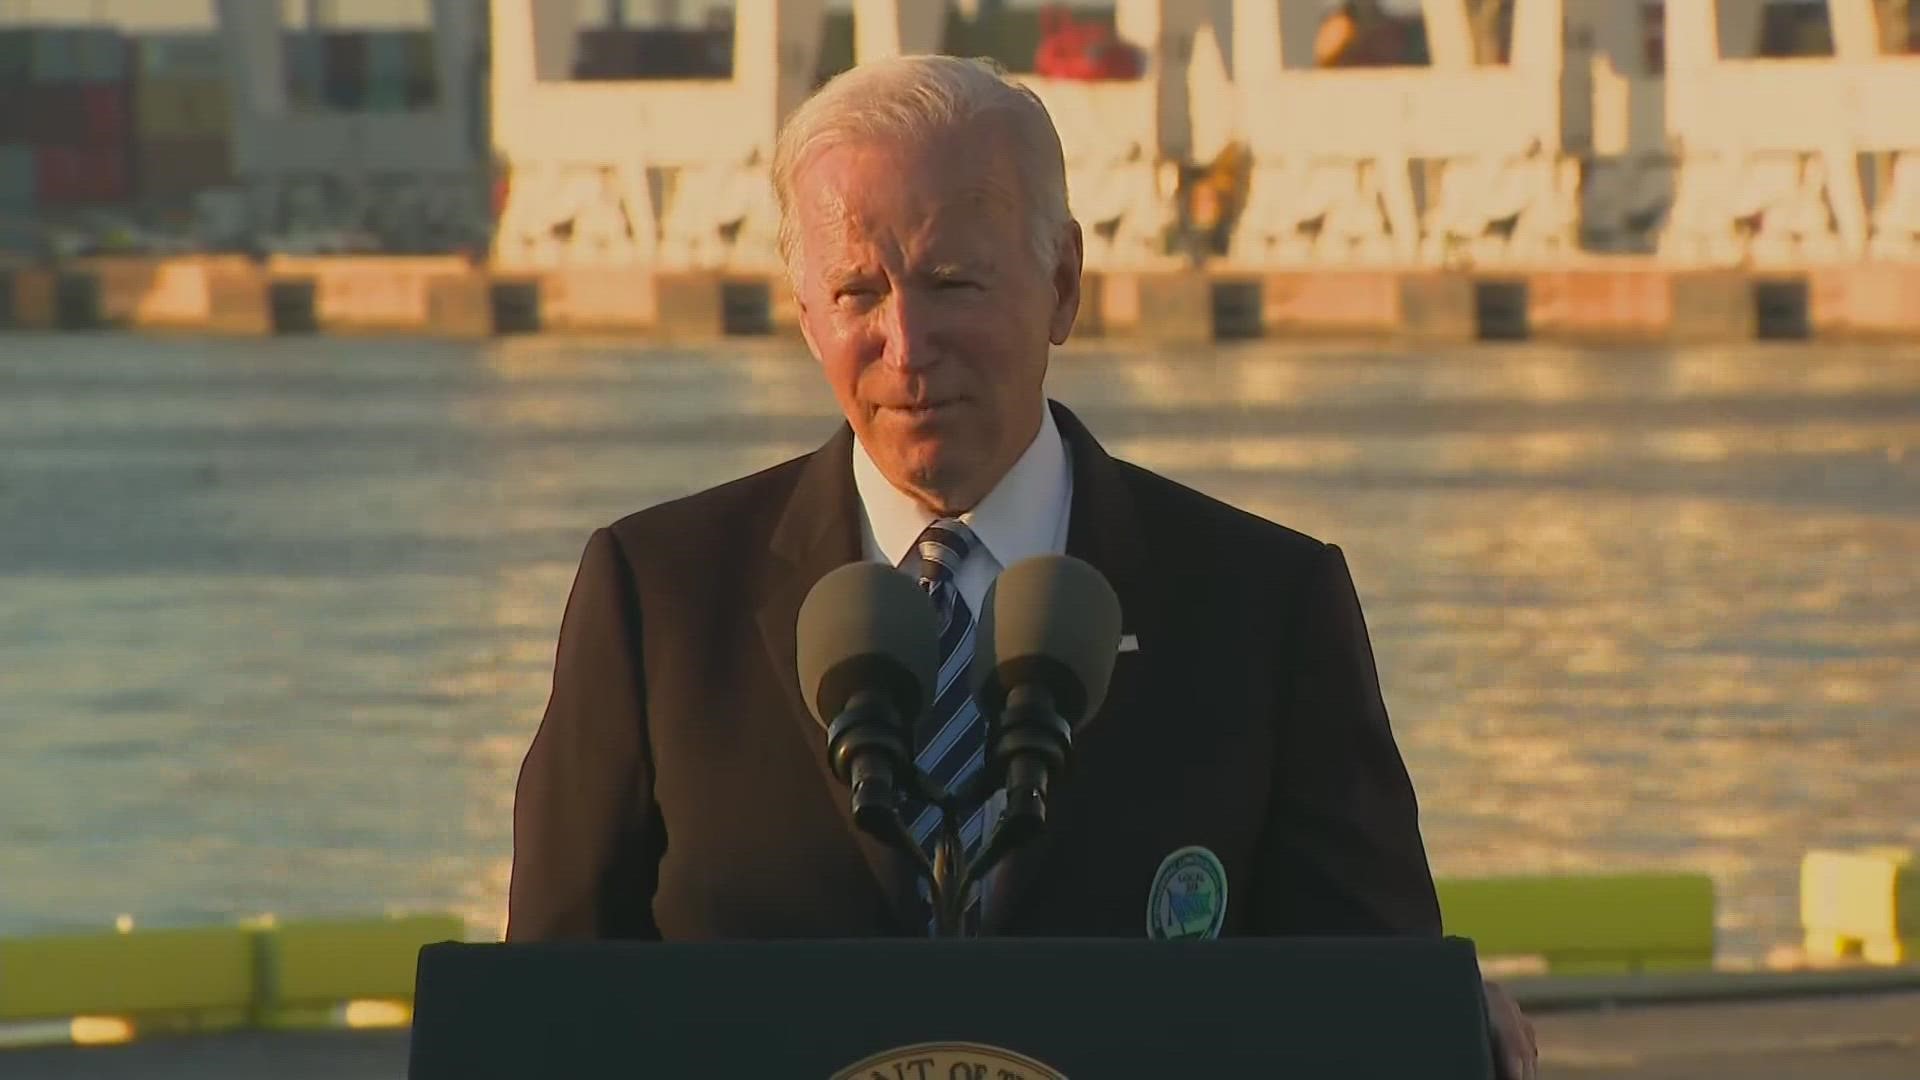 Biden spoke in Baltimore about his infrastructure bill, which he plans to sign on Monday after it cleared the House last week.